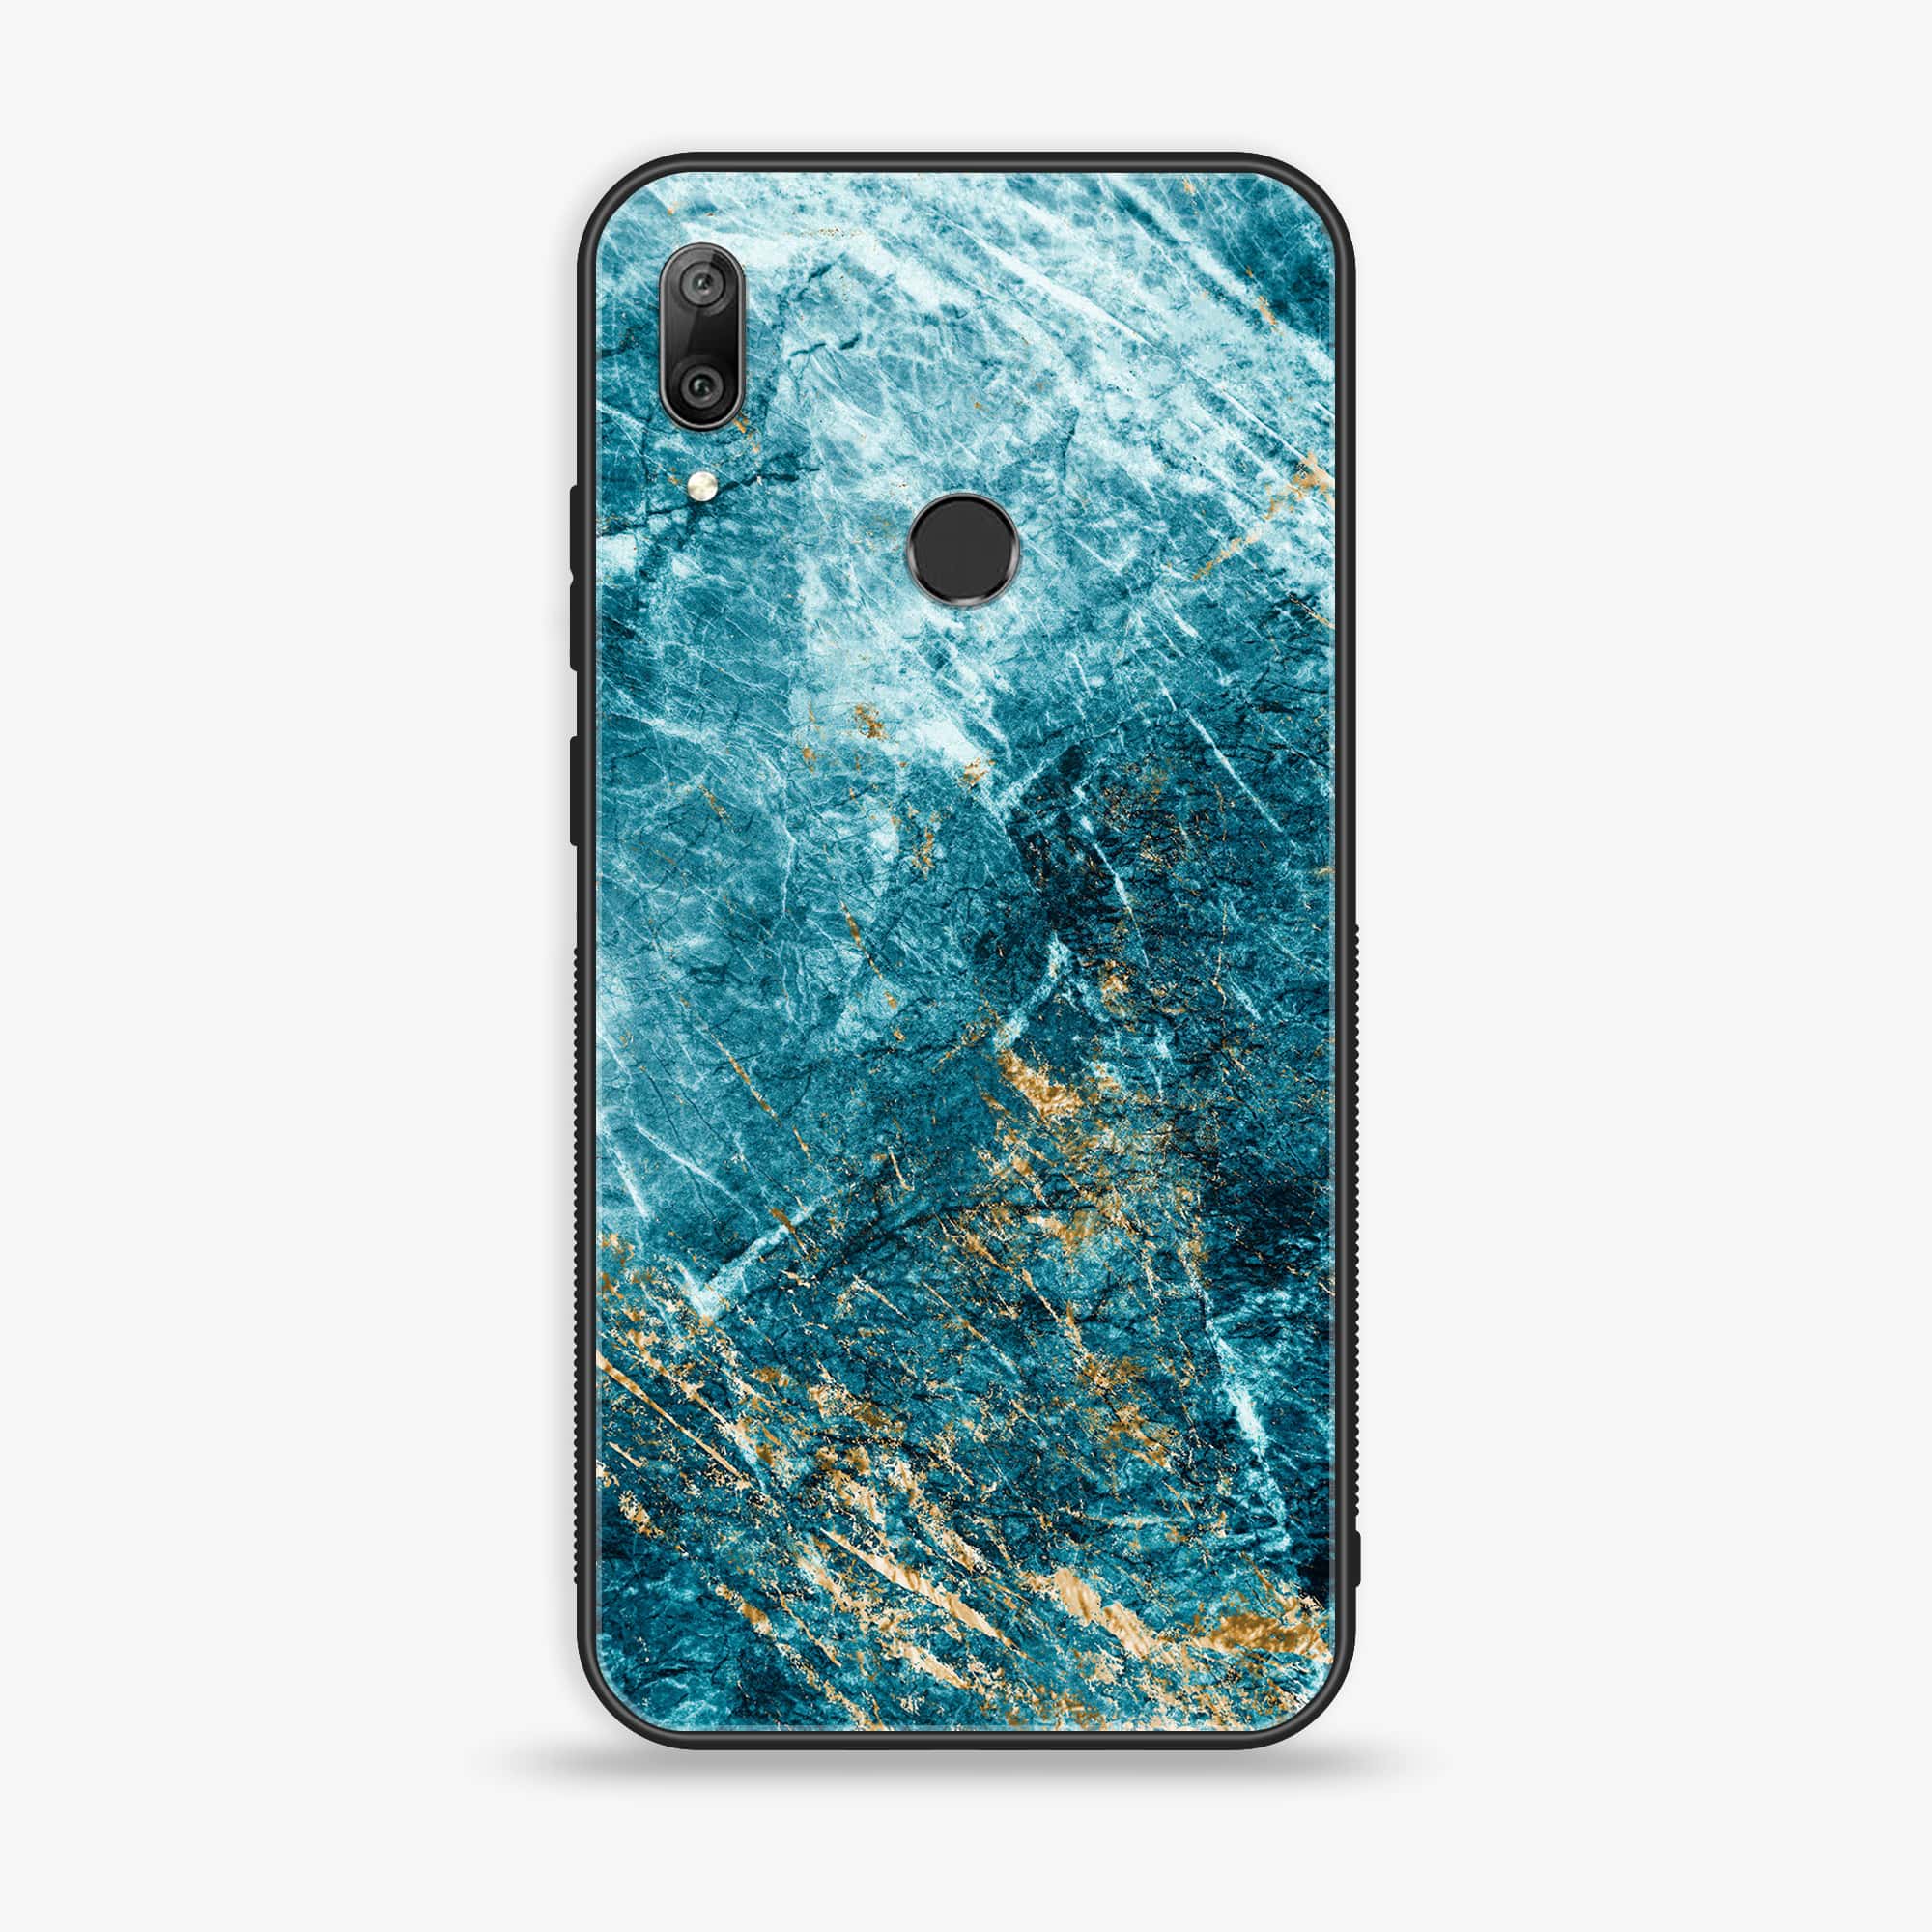 Huawei Y7 Prime (2019) - Blue Marble Series V 2.0- Premium Printed Glass soft Bumper shock Proof Case